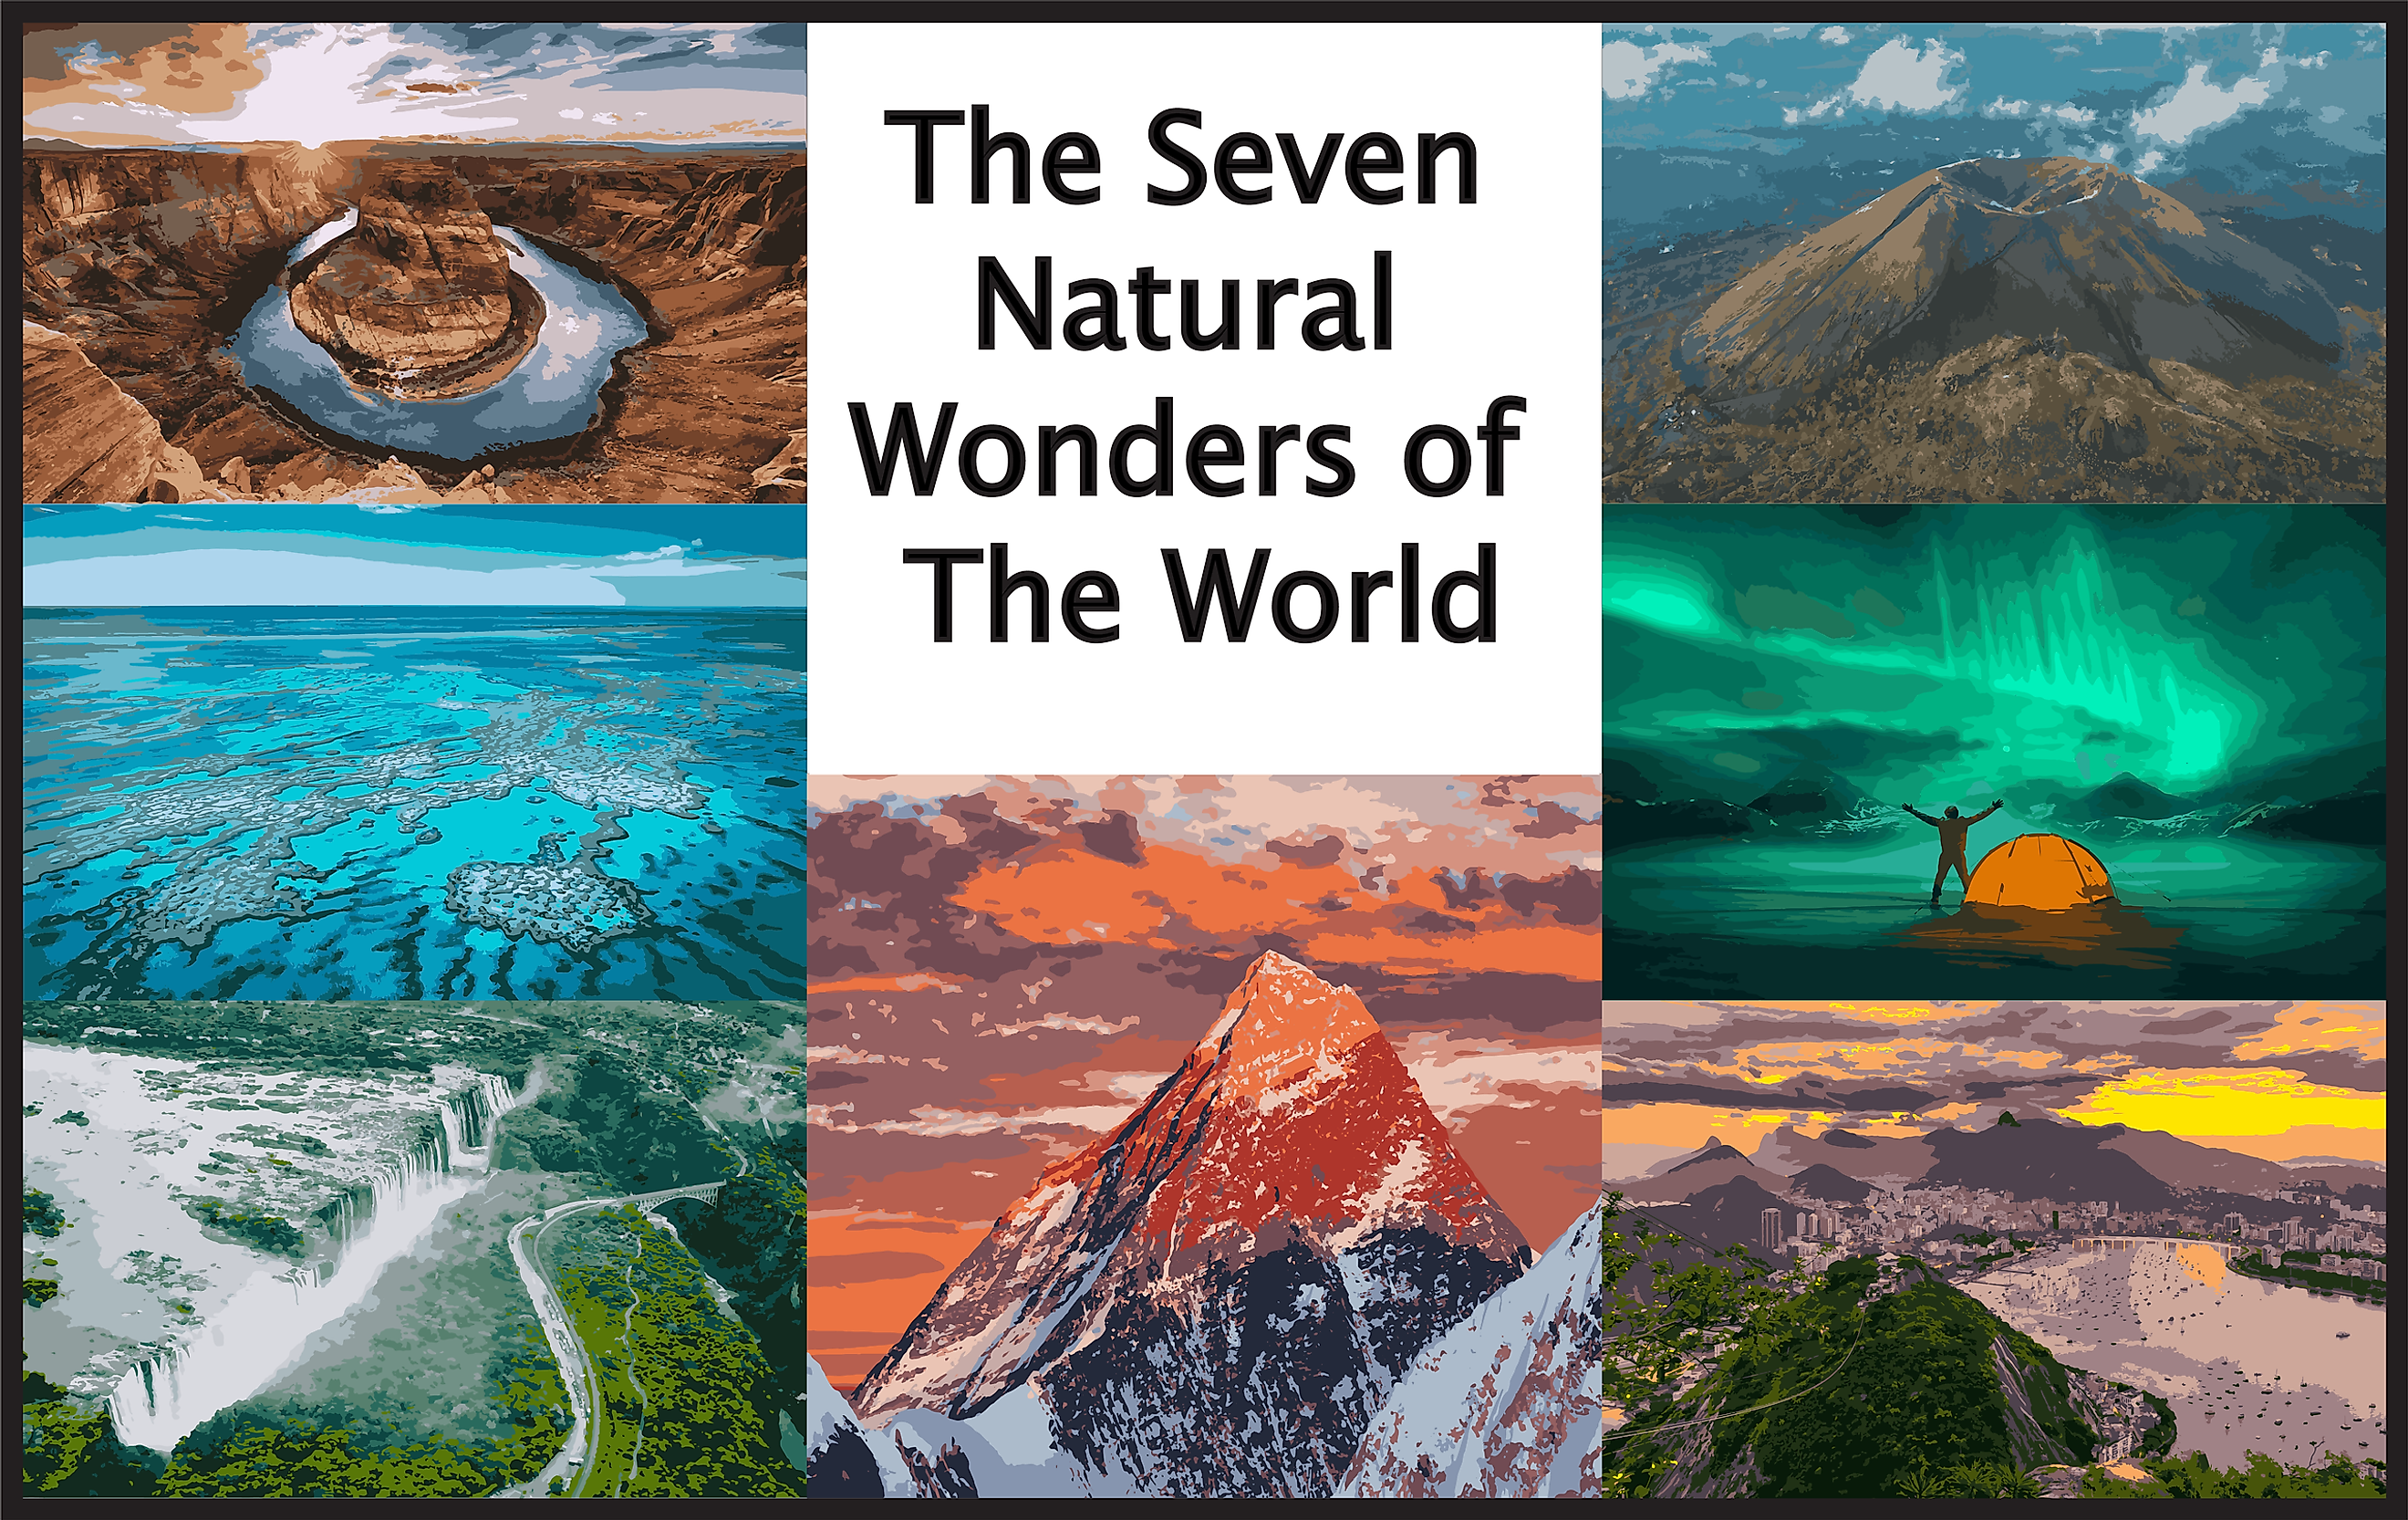 What Are The 7 Wonders Of The World? - WorldAtlas